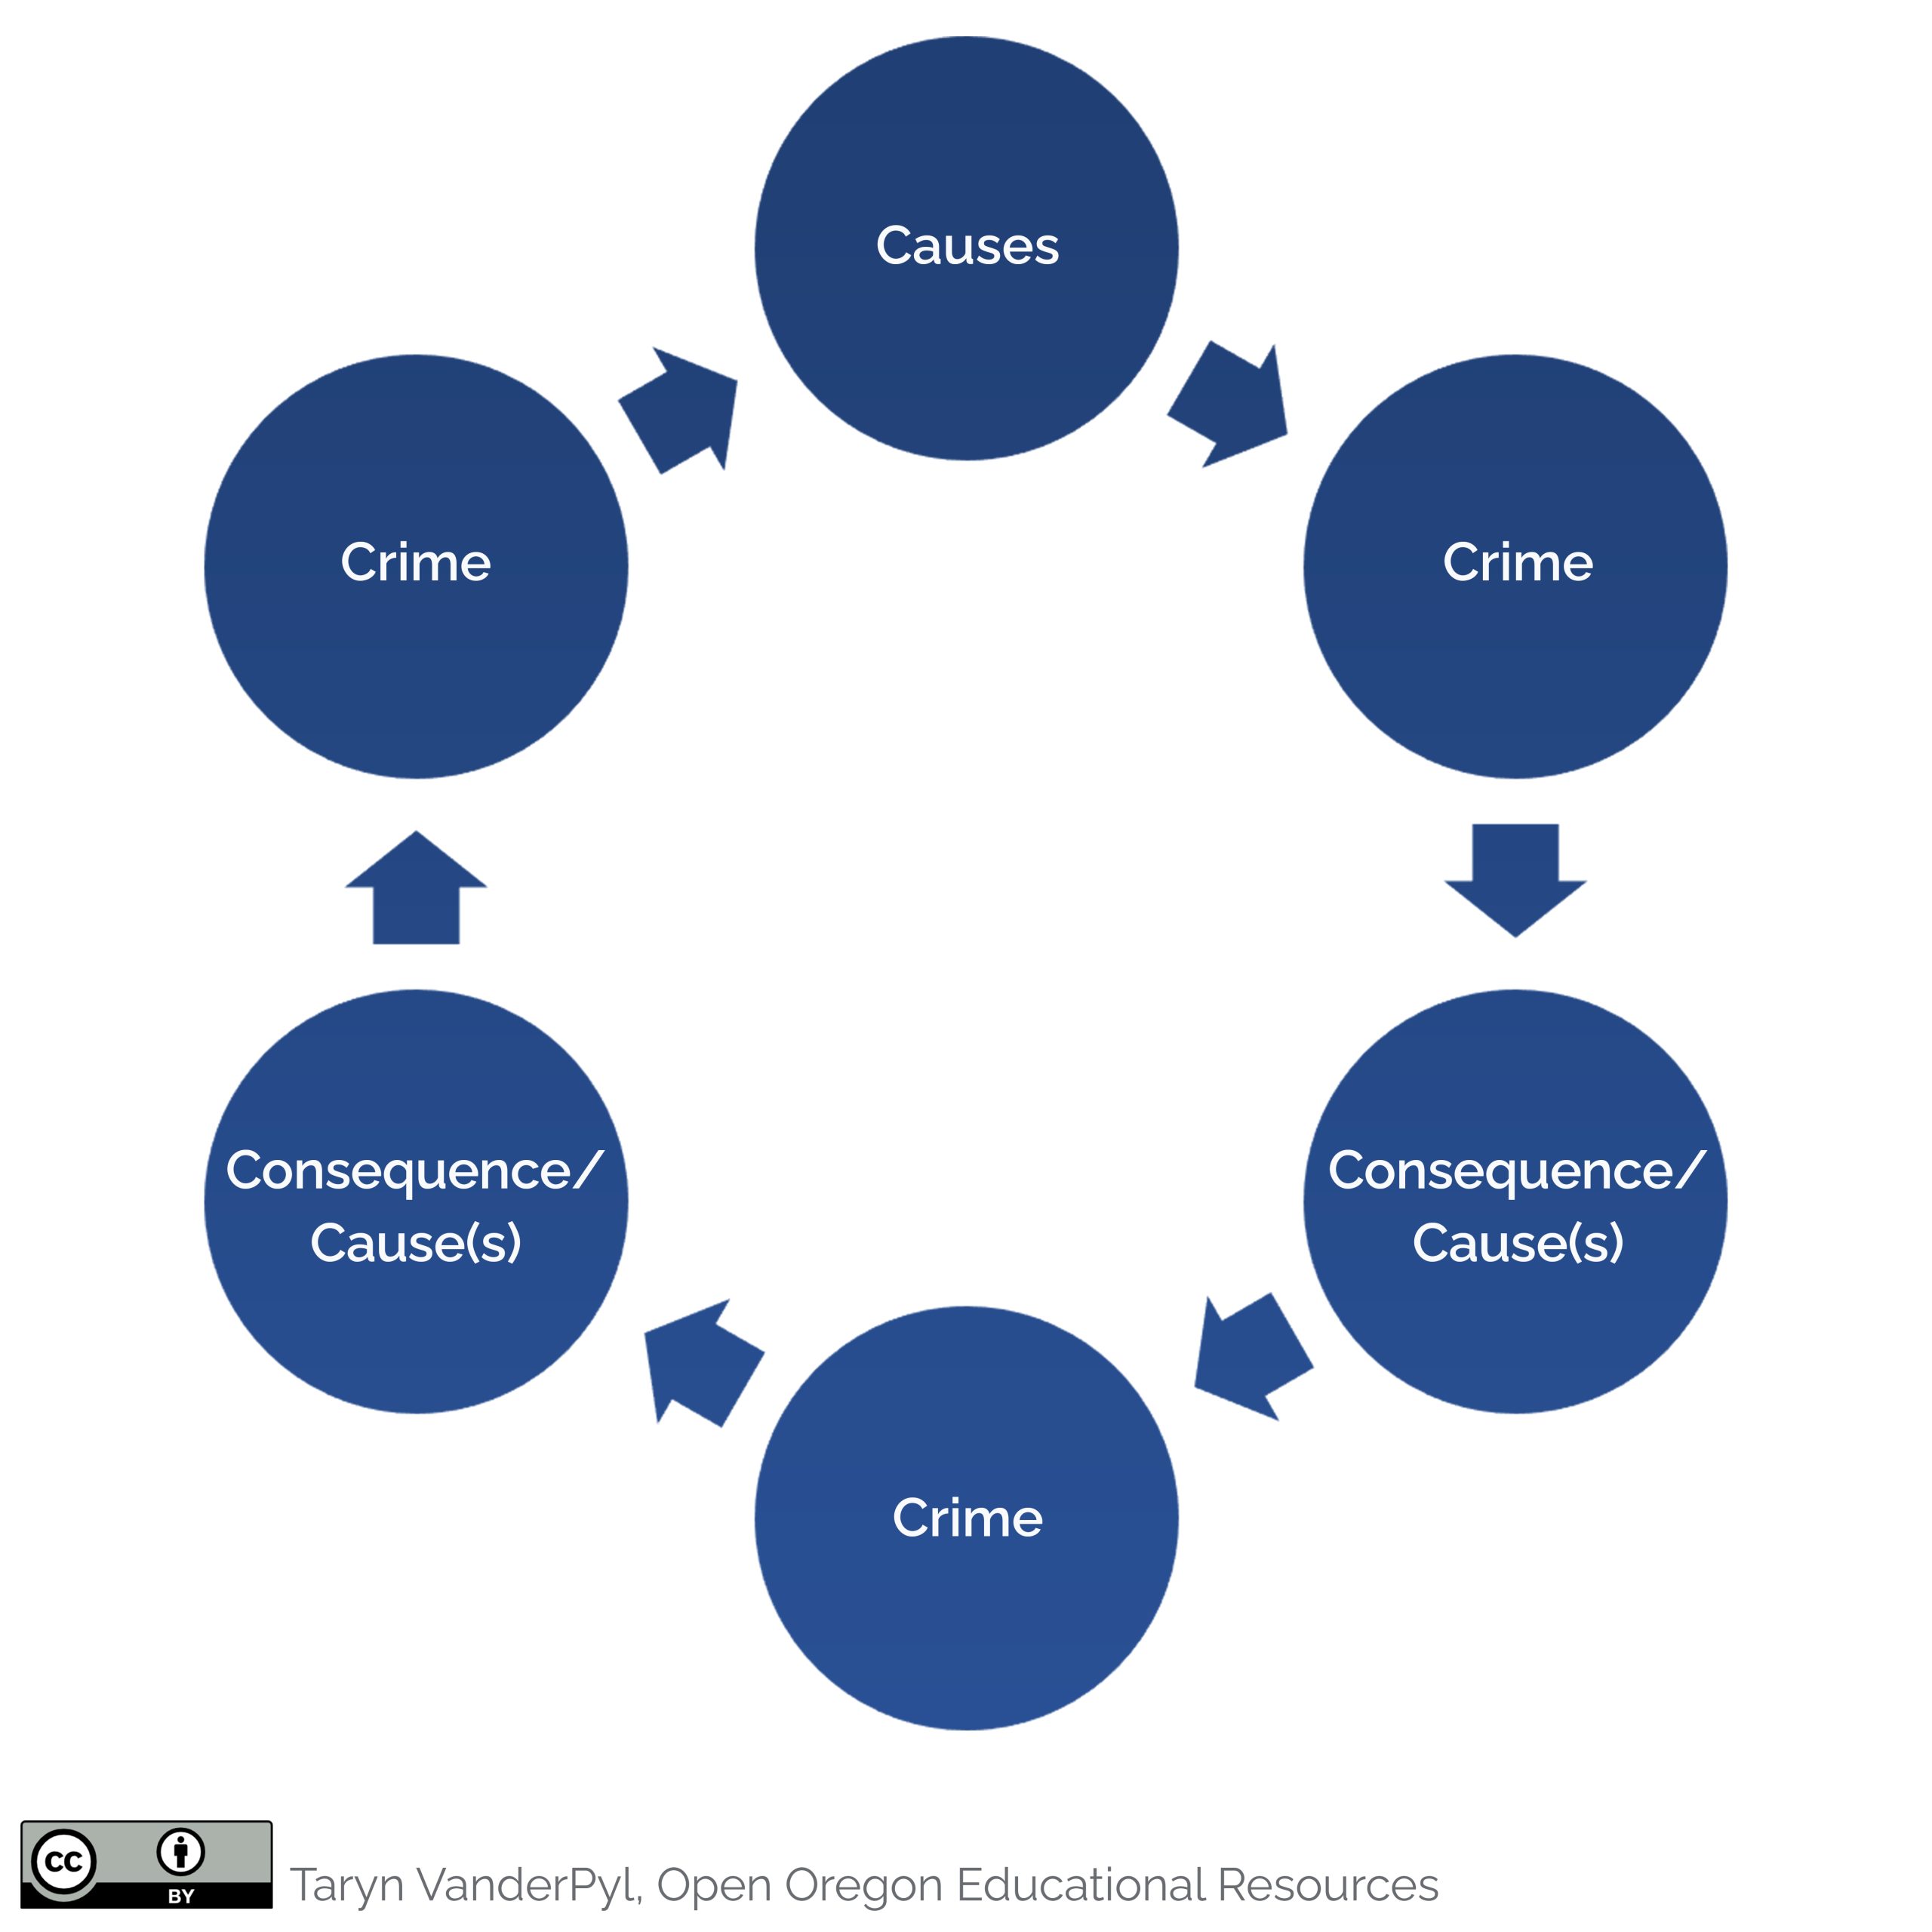 A cycle with no beginning and end goes from causes to crime to consequences/causes and then back around.